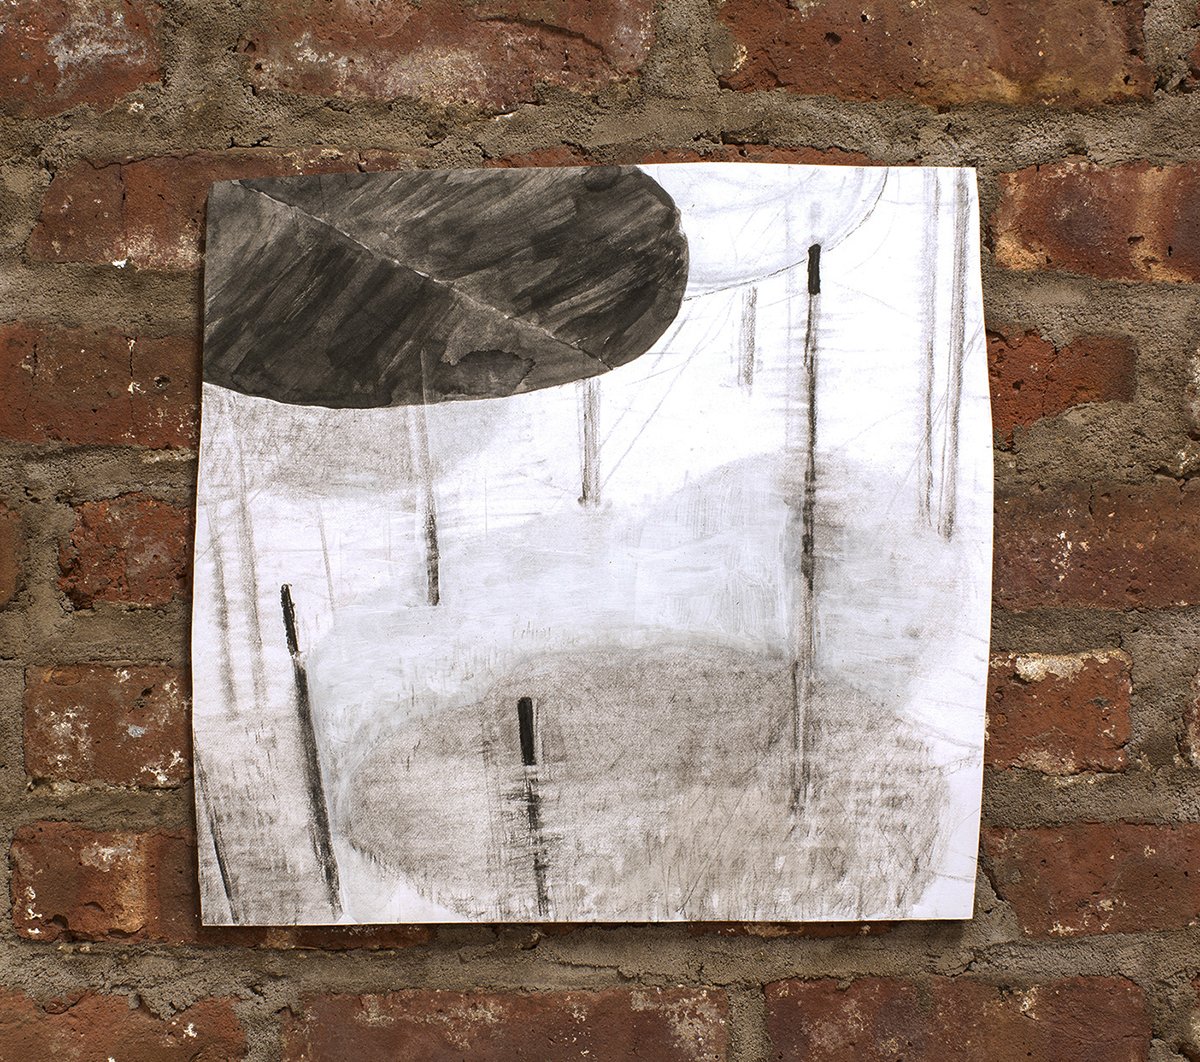   Untitled Drawing 2   Charcoal, ink and gesso on paper Irregularly shaped approximately 13 x 13 ½ inches 2021 